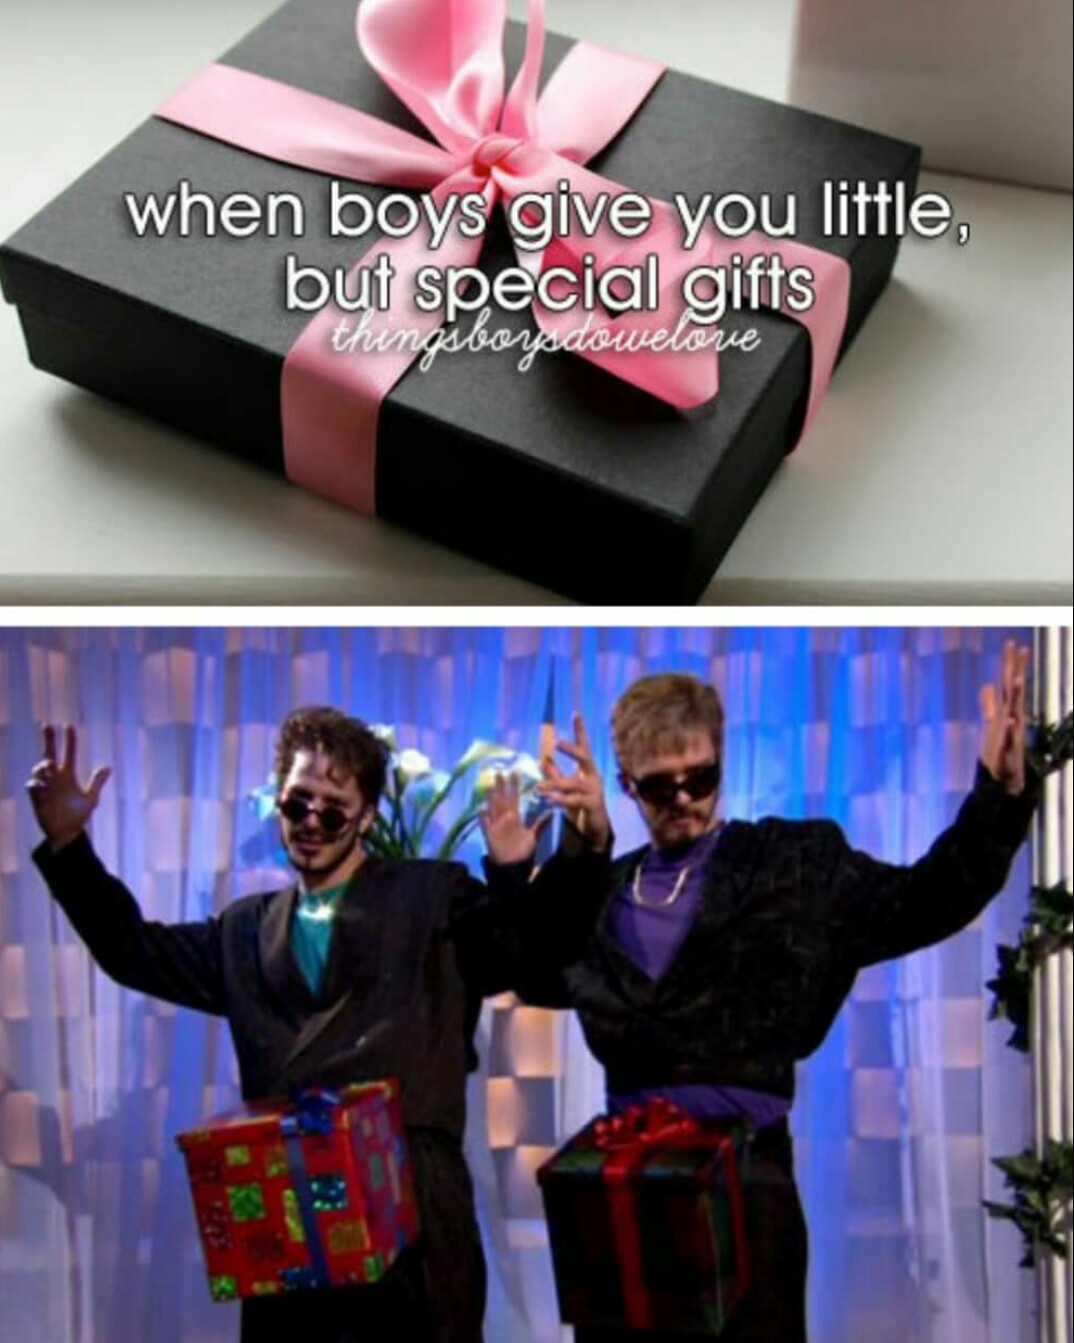 my dick in a box - when boys give you little, but special gifts thingsboysdowelove